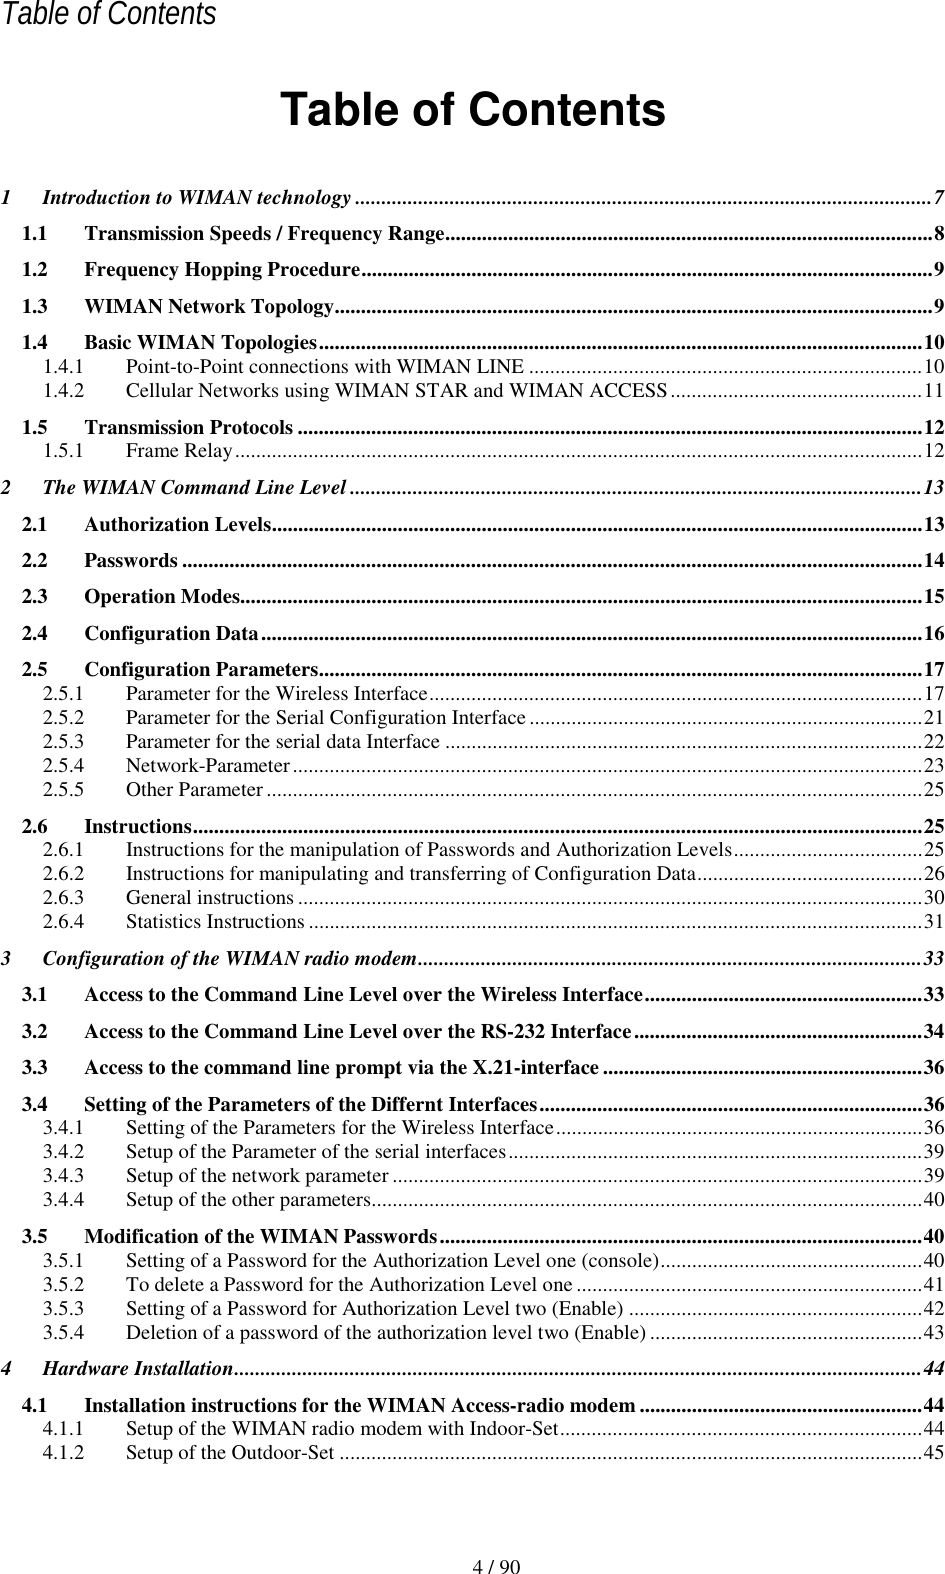   Table of Contents 4 / 90 Table of Contents 1 Introduction to WIMAN technology ..............................................................................................................7 1.1 Transmission Speeds / Frequency Range.............................................................................................8 1.2 Frequency Hopping Procedure.............................................................................................................9 1.3 WIMAN Network Topology..................................................................................................................9 1.4 Basic WIMAN Topologies...................................................................................................................10 1.4.1 Point-to-Point connections with WIMAN LINE ...........................................................................10 1.4.2 Cellular Networks using WIMAN STAR and WIMAN ACCESS................................................11 1.5 Transmission Protocols .......................................................................................................................12 1.5.1 Frame Relay...................................................................................................................................12 2 The WIMAN Command Line Level .............................................................................................................13 2.1 Authorization Levels............................................................................................................................13 2.2 Passwords .............................................................................................................................................14 2.3 Operation Modes..................................................................................................................................15 2.4 Configuration Data..............................................................................................................................16 2.5 Configuration Parameters...................................................................................................................17 2.5.1 Parameter for the Wireless Interface..............................................................................................17 2.5.2 Parameter for the Serial Configuration Interface ...........................................................................21 2.5.3 Parameter for the serial data Interface ...........................................................................................22 2.5.4 Network-Parameter........................................................................................................................23 2.5.5 Other Parameter .............................................................................................................................25 2.6 Instructions...........................................................................................................................................25 2.6.1 Instructions for the manipulation of Passwords and Authorization Levels....................................25 2.6.2 Instructions for manipulating and transferring of Configuration Data...........................................26 2.6.3 General instructions .......................................................................................................................30 2.6.4 Statistics Instructions .....................................................................................................................31 3 Configuration of the WIMAN radio modem................................................................................................33 3.1 Access to the Command Line Level over the Wireless Interface.....................................................33 3.2 Access to the Command Line Level over the RS-232 Interface.......................................................34 3.3 Access to the command line prompt via the X.21-interface .............................................................36 3.4 Setting of the Parameters of the Differnt Interfaces.........................................................................36 3.4.1 Setting of the Parameters for the Wireless Interface......................................................................36 3.4.2 Setup of the Parameter of the serial interfaces...............................................................................39 3.4.3 Setup of the network parameter .....................................................................................................39 3.4.4 Setup of the other parameters.........................................................................................................40 3.5 Modification of the WIMAN Passwords............................................................................................40 3.5.1 Setting of a Password for the Authorization Level one (console)..................................................40 3.5.2 To delete a Password for the Authorization Level one ..................................................................41 3.5.3 Setting of a Password for Authorization Level two (Enable) ........................................................42 3.5.4 Deletion of a password of the authorization level two (Enable) ....................................................43 4 Hardware Installation...................................................................................................................................44 4.1 Installation instructions for the WIMAN Access-radio modem ......................................................44 4.1.1 Setup of the WIMAN radio modem with Indoor-Set.....................................................................44 4.1.2 Setup of the Outdoor-Set ...............................................................................................................45 